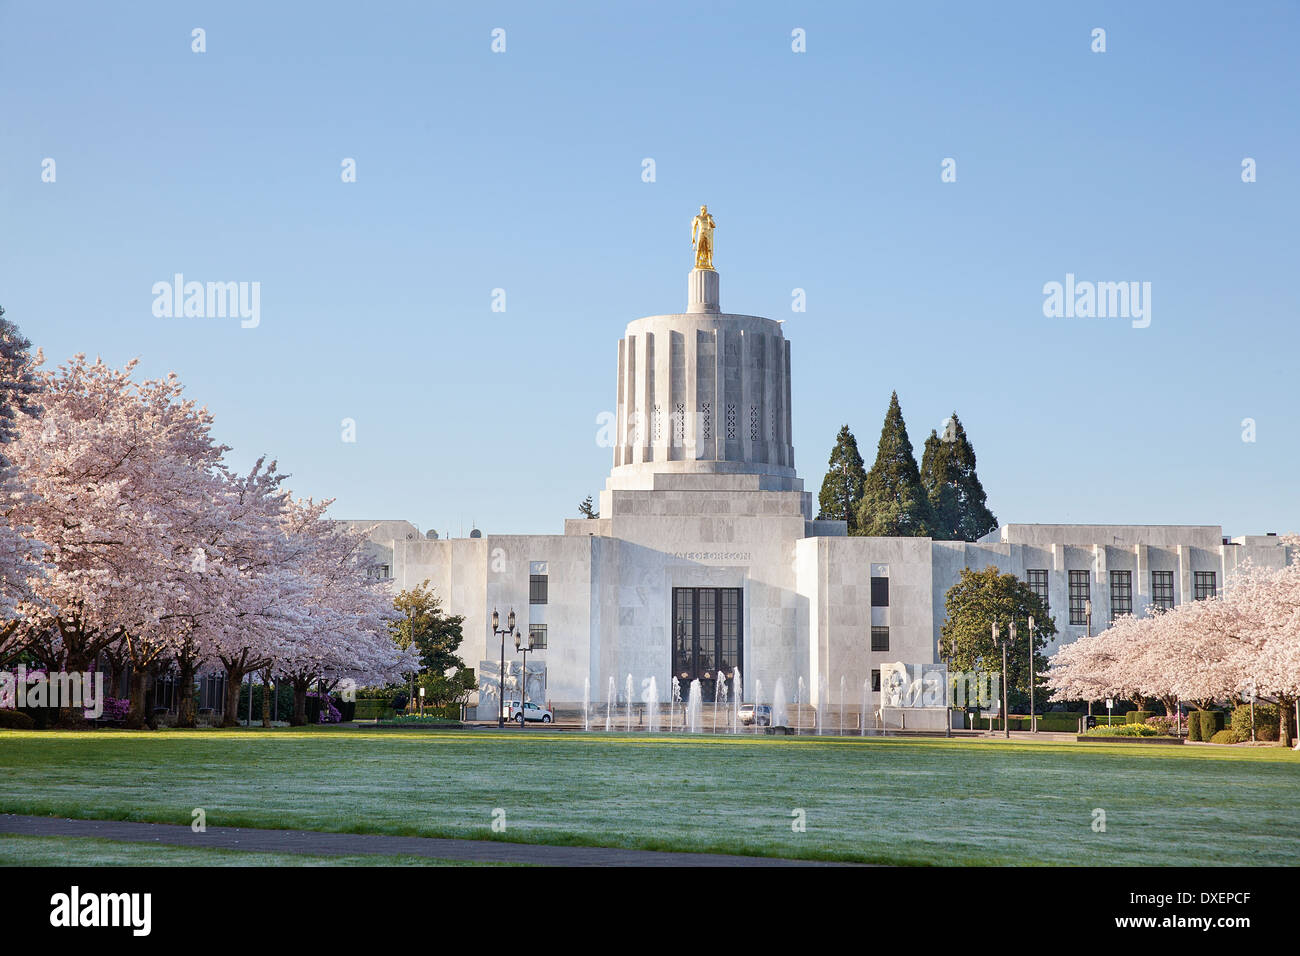 Salem Oregon State Capitol Building with Flowering Cherry Blossom Trees in Spring Season Stock Photo